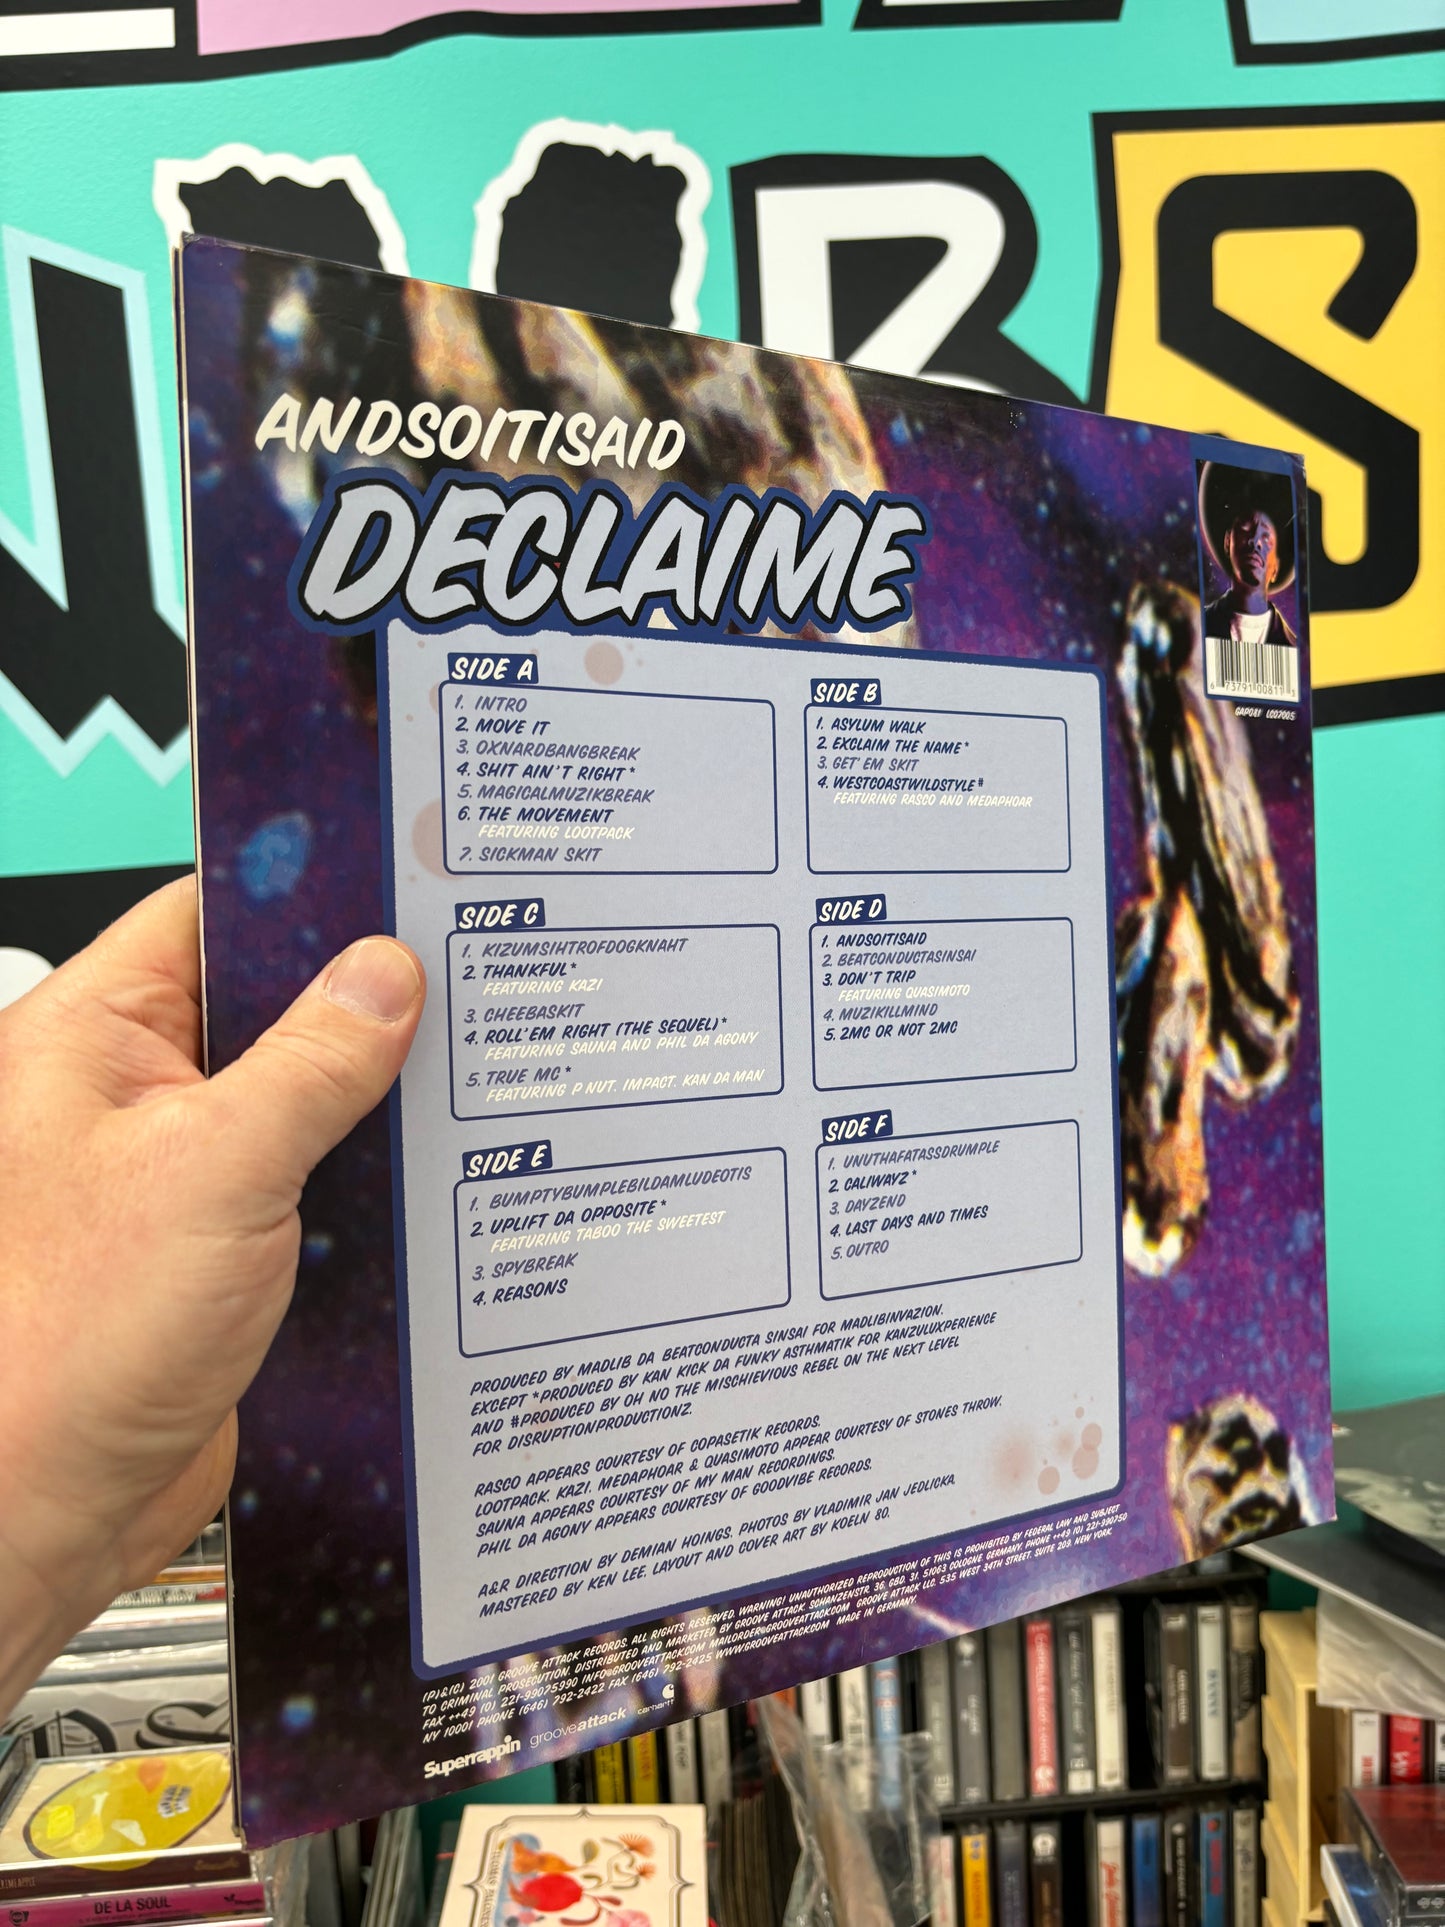 Declaime: Andsoitisaid(Come Take A Walk Through The Mind Of…), 3LP, gatefold, 1st pressing Europe, Groove Attack Productions, Superrappin, Germany 2001